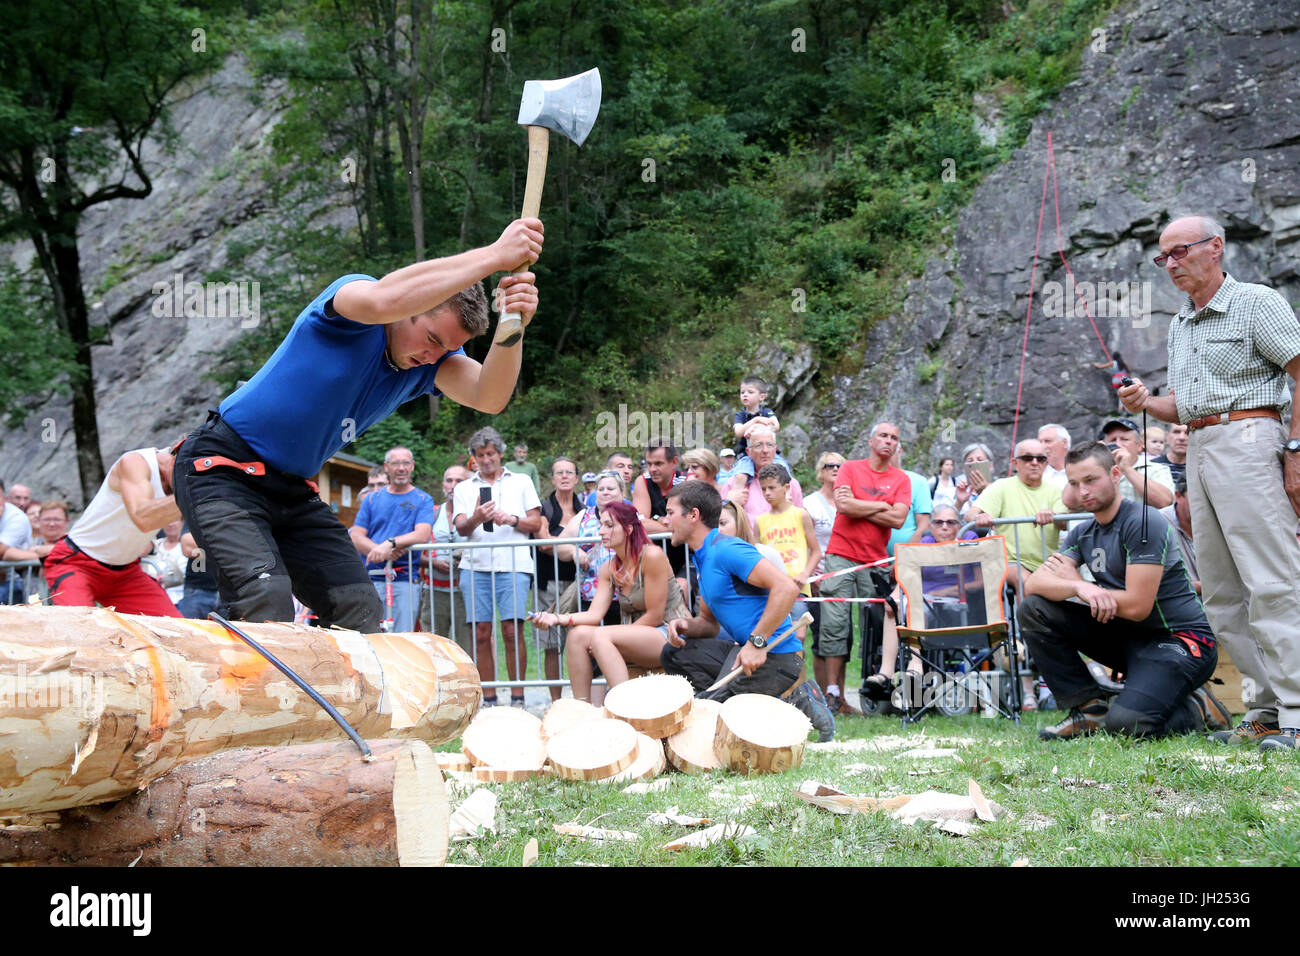 Lumberjack competition and demonstration.  France. Stock Photo